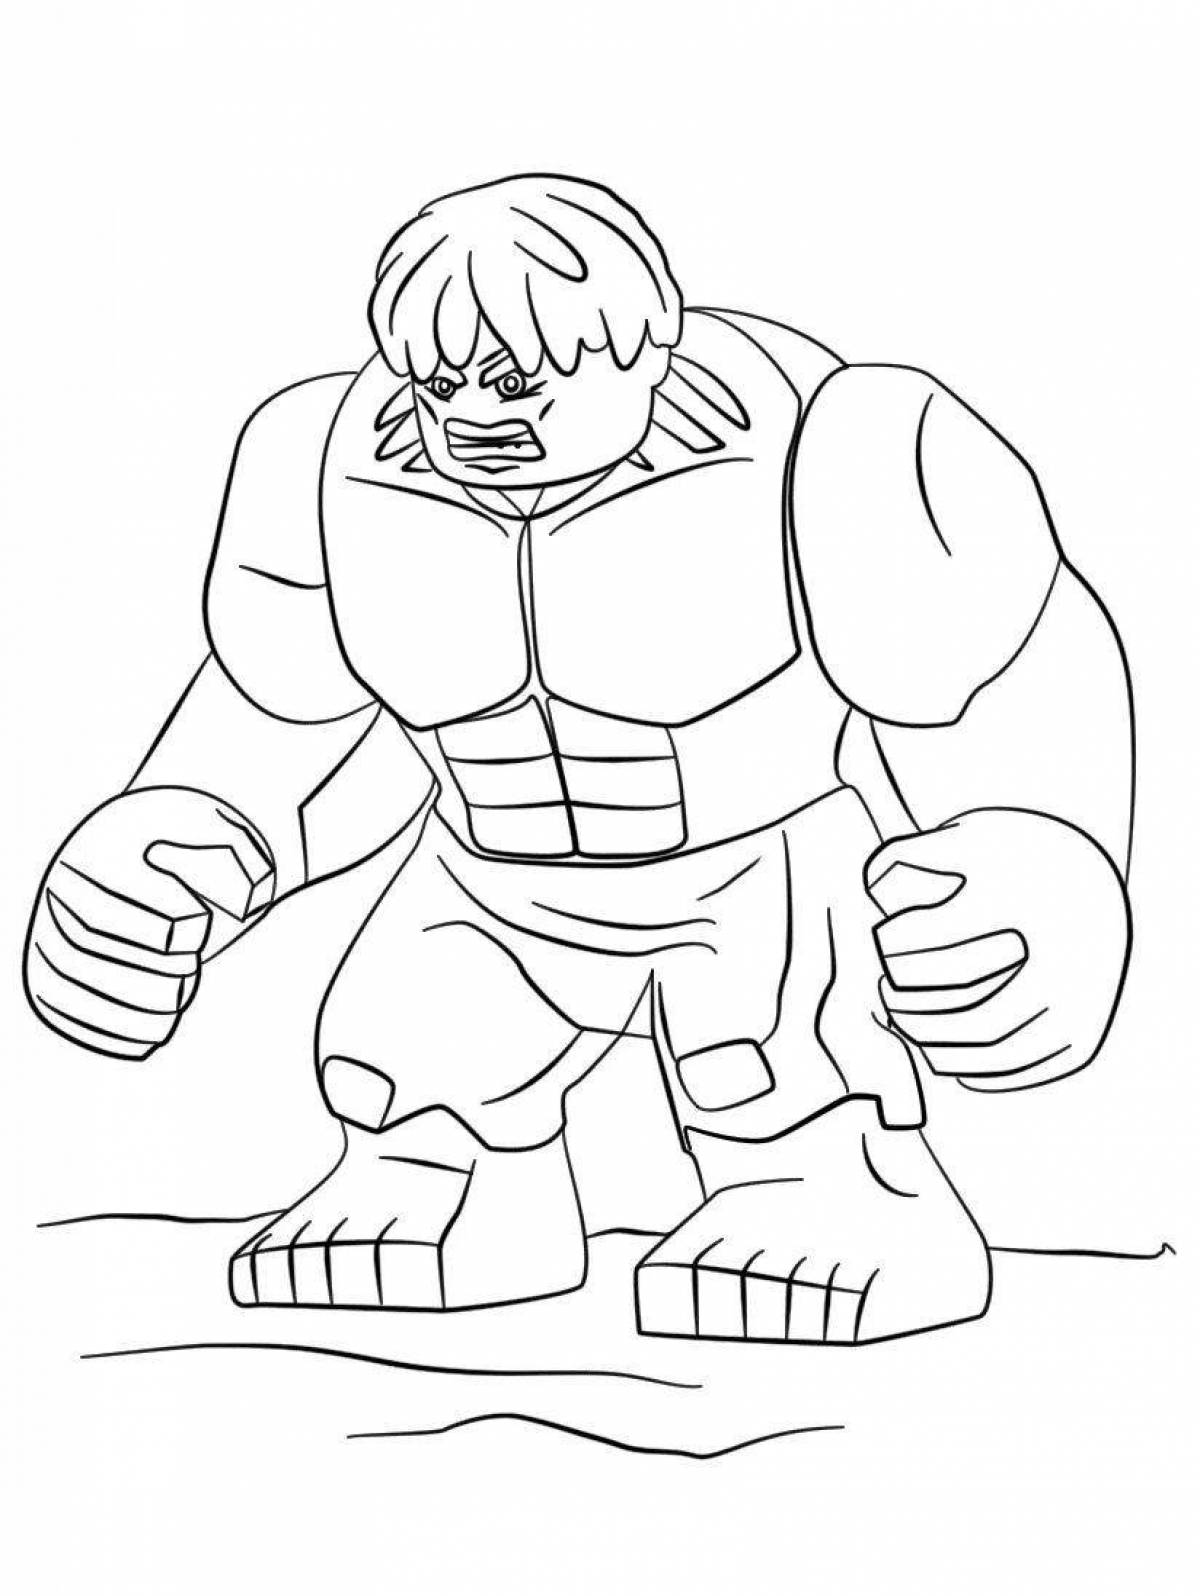 Awesome Lego Hulk coloring book